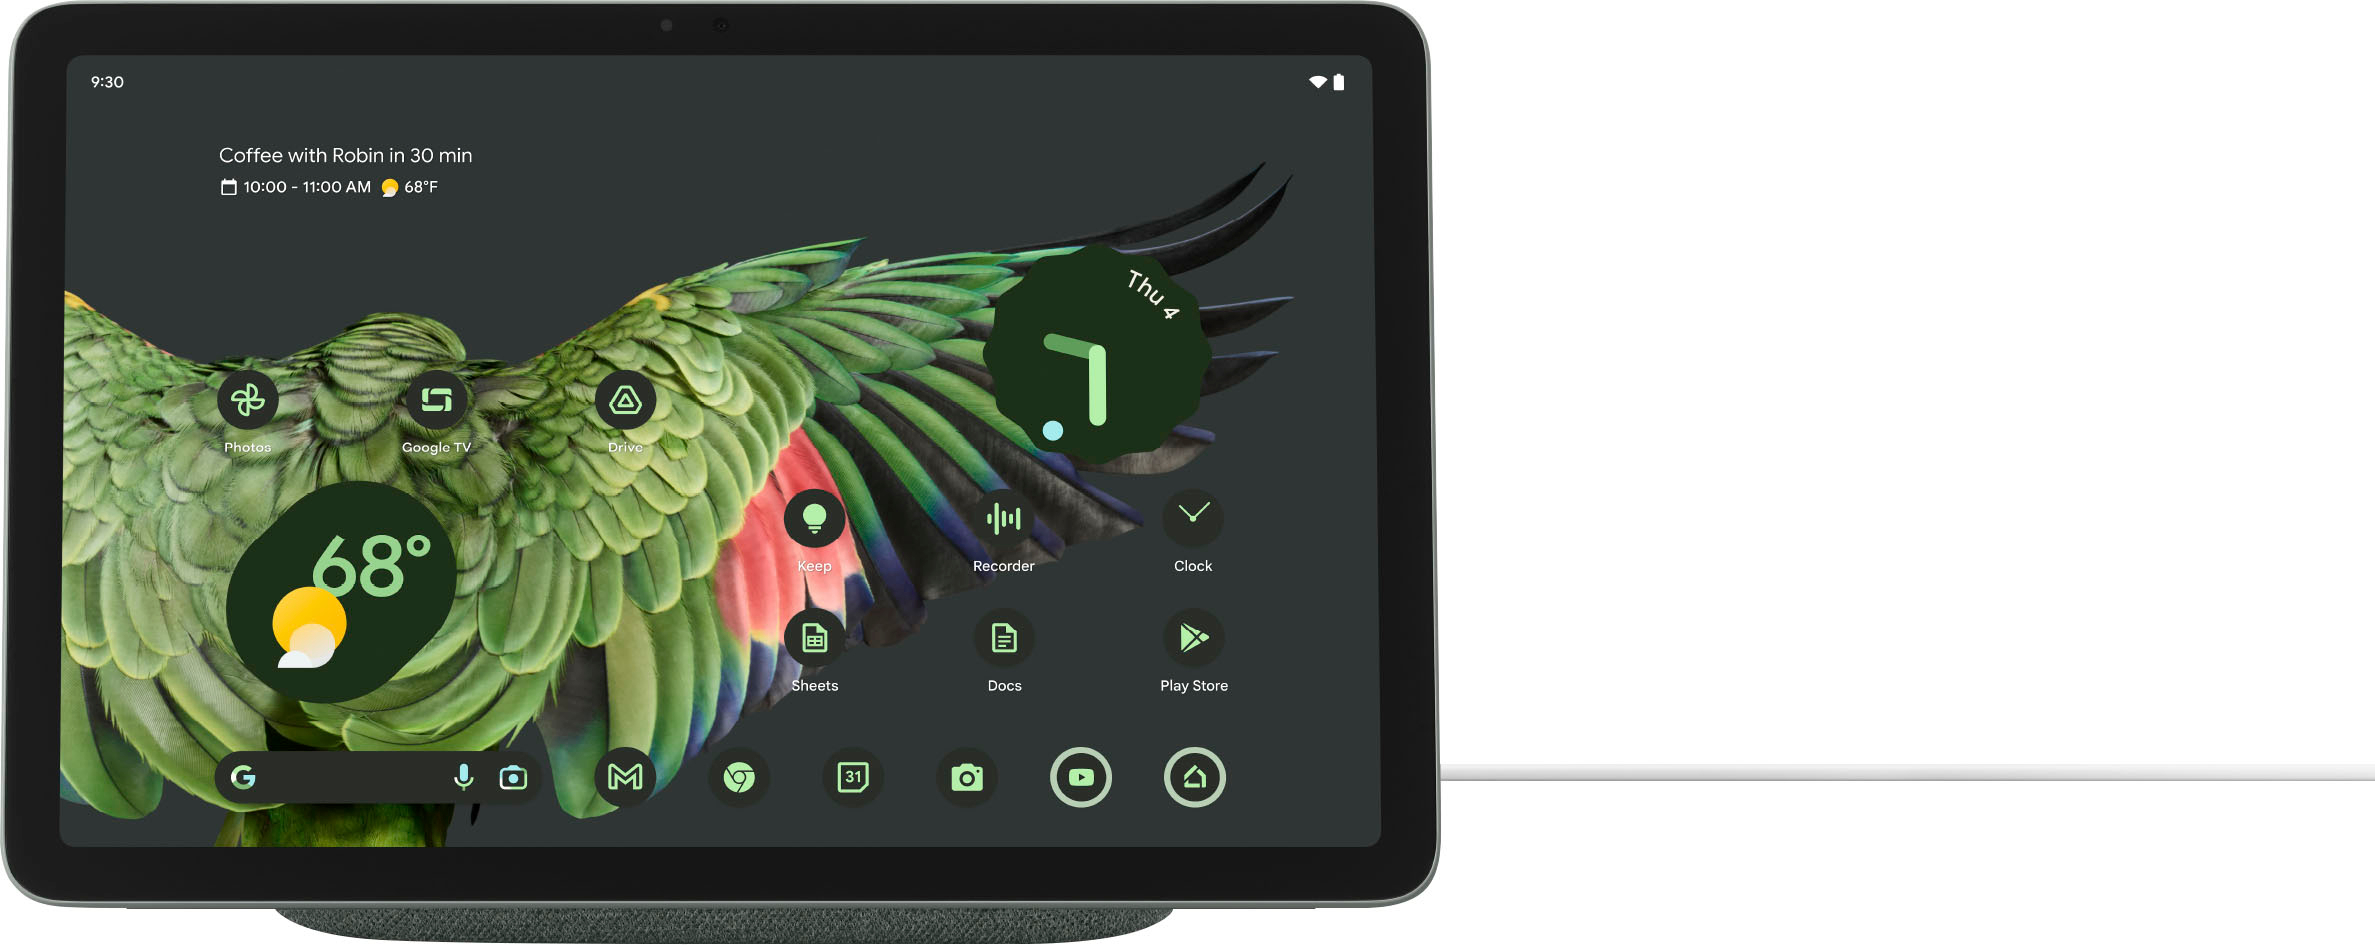 Google Pixel Tablet with Charging Speaker Dock - Android Tablet with  11-Inch Screen, Smart Home Controls, and Long-Lasting Battery - Hazel/Hazel  - 128